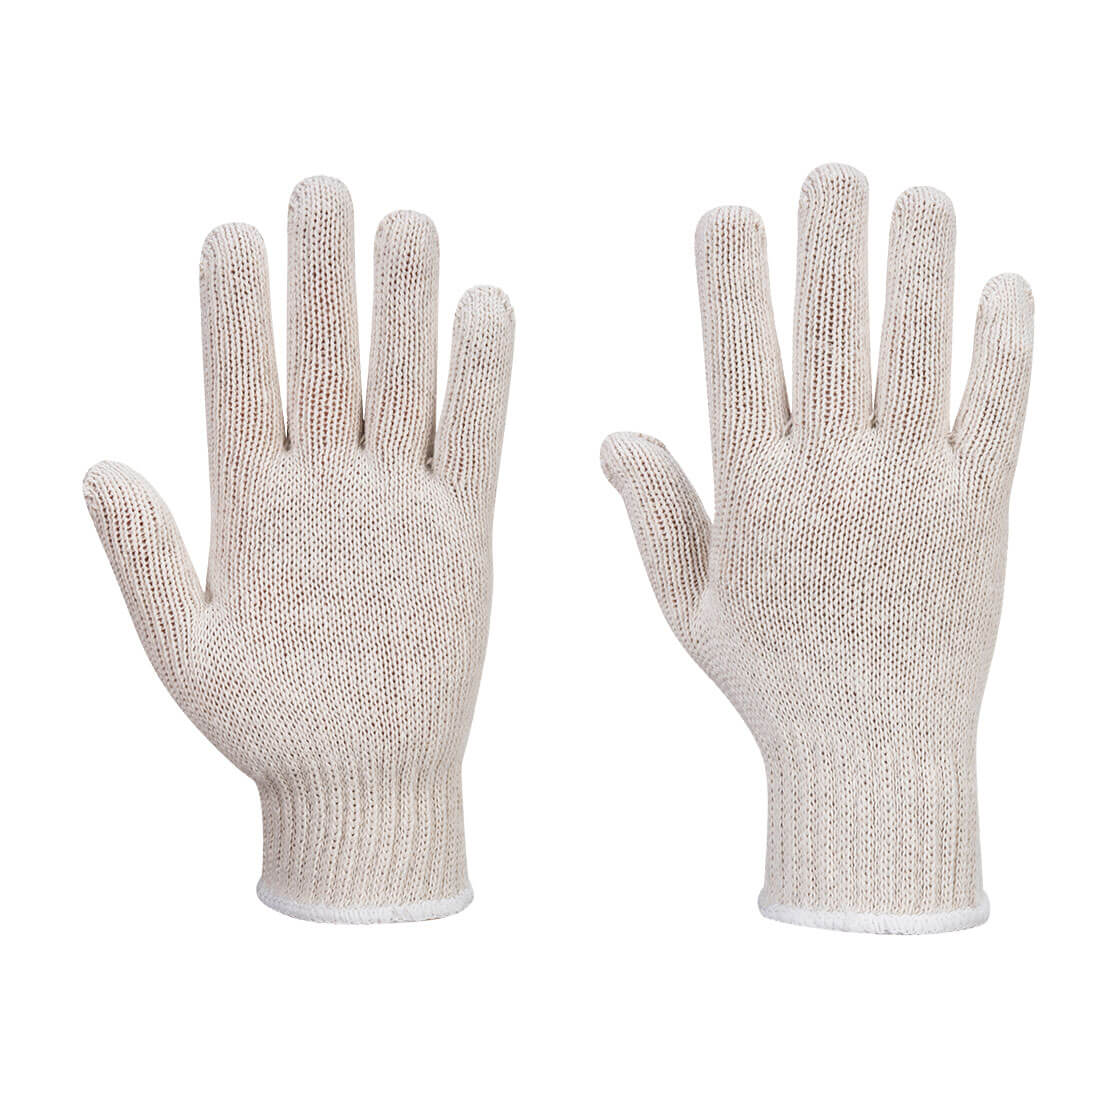 Portwest AB030 - String Knit Liner Glove (288 Pairs)